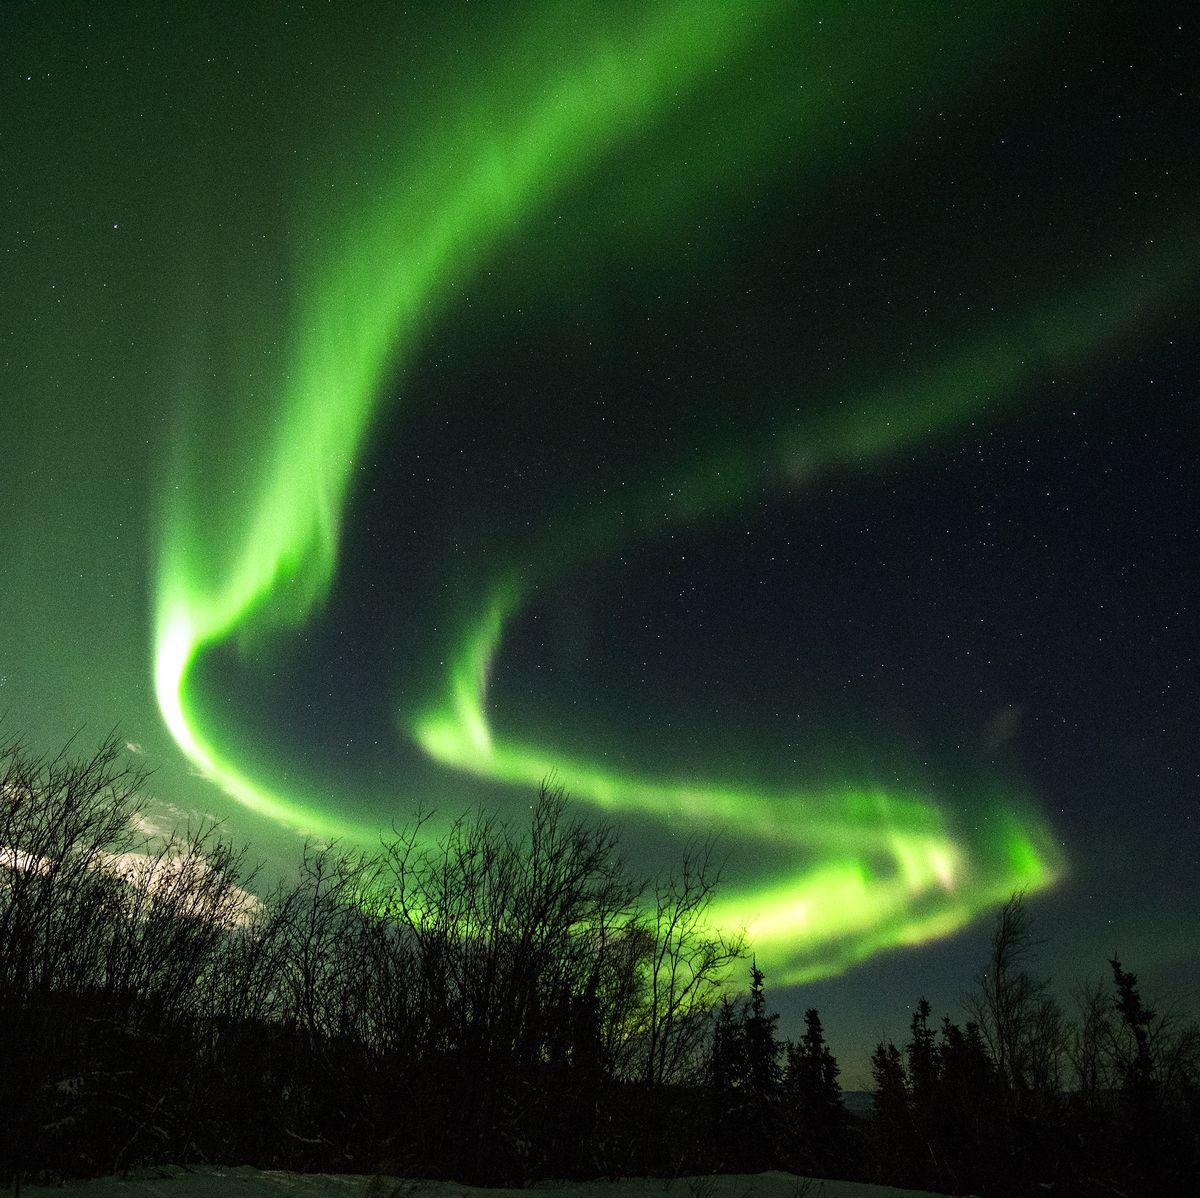 https://hips.hearstapps.com/hmg-prod/images/the-aurora-borealis-appears-in-the-sky-on-january-8-2017-news-photo-1677071053.jpg?crop=0.668xw:1.00xh;0.167xw,0&resize=1200:*